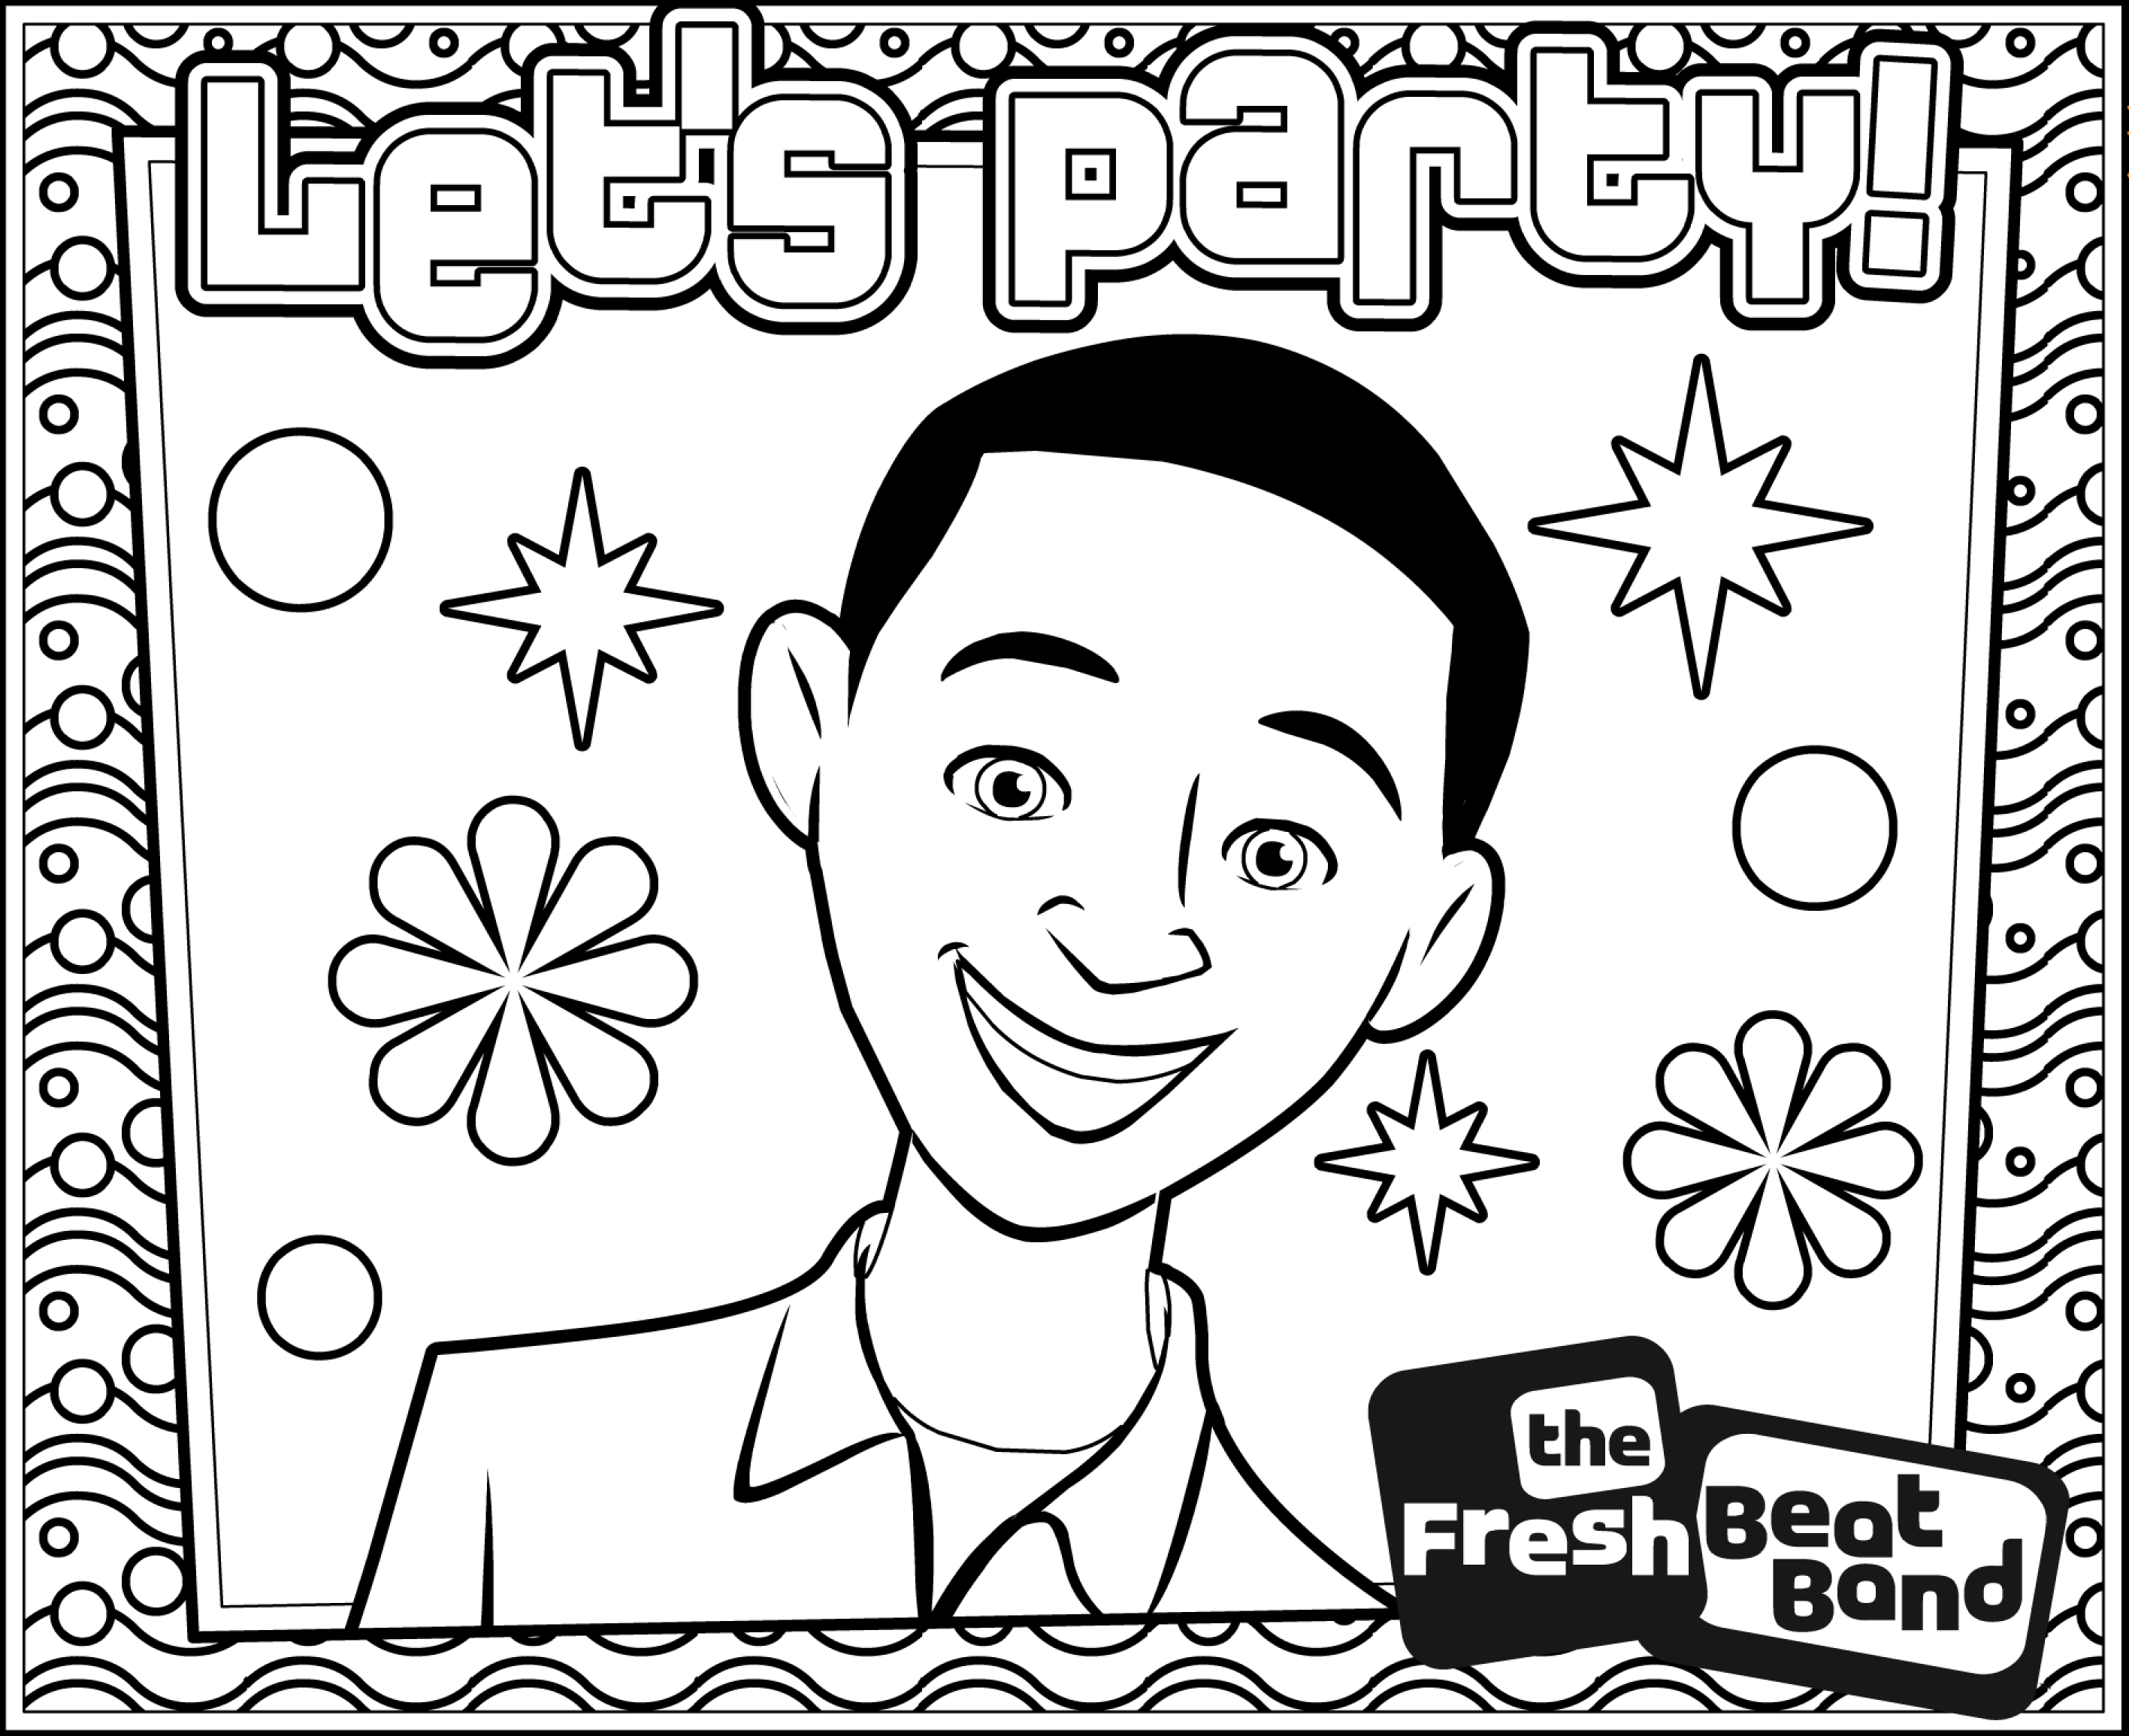 Shout - Fresh Beat Band Coloring Pages